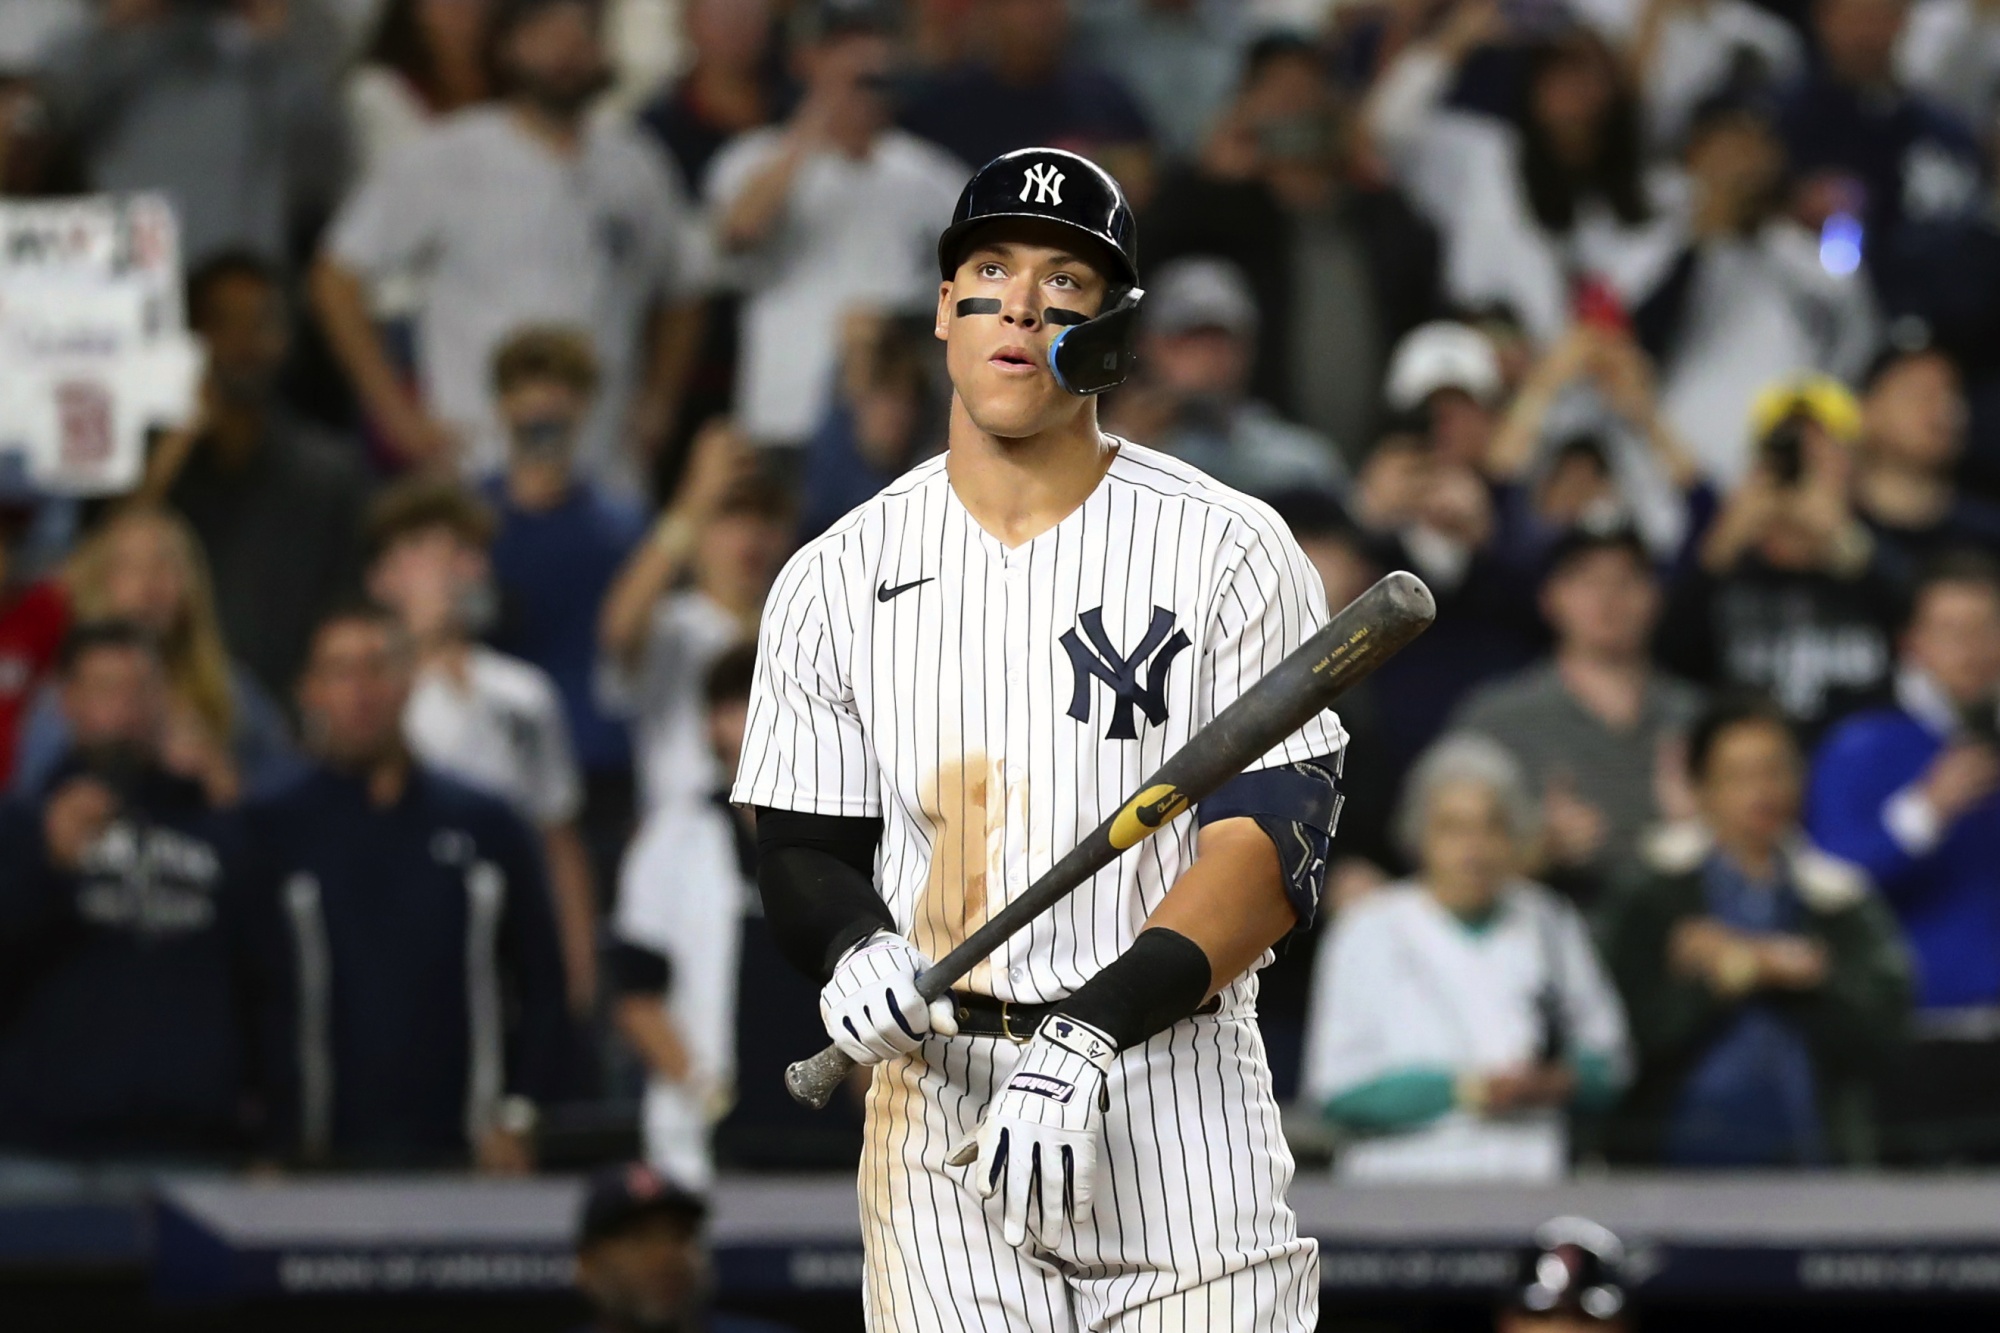 All Rise: Entire Yankee stadium, and Fox broadcast, thought Aaron